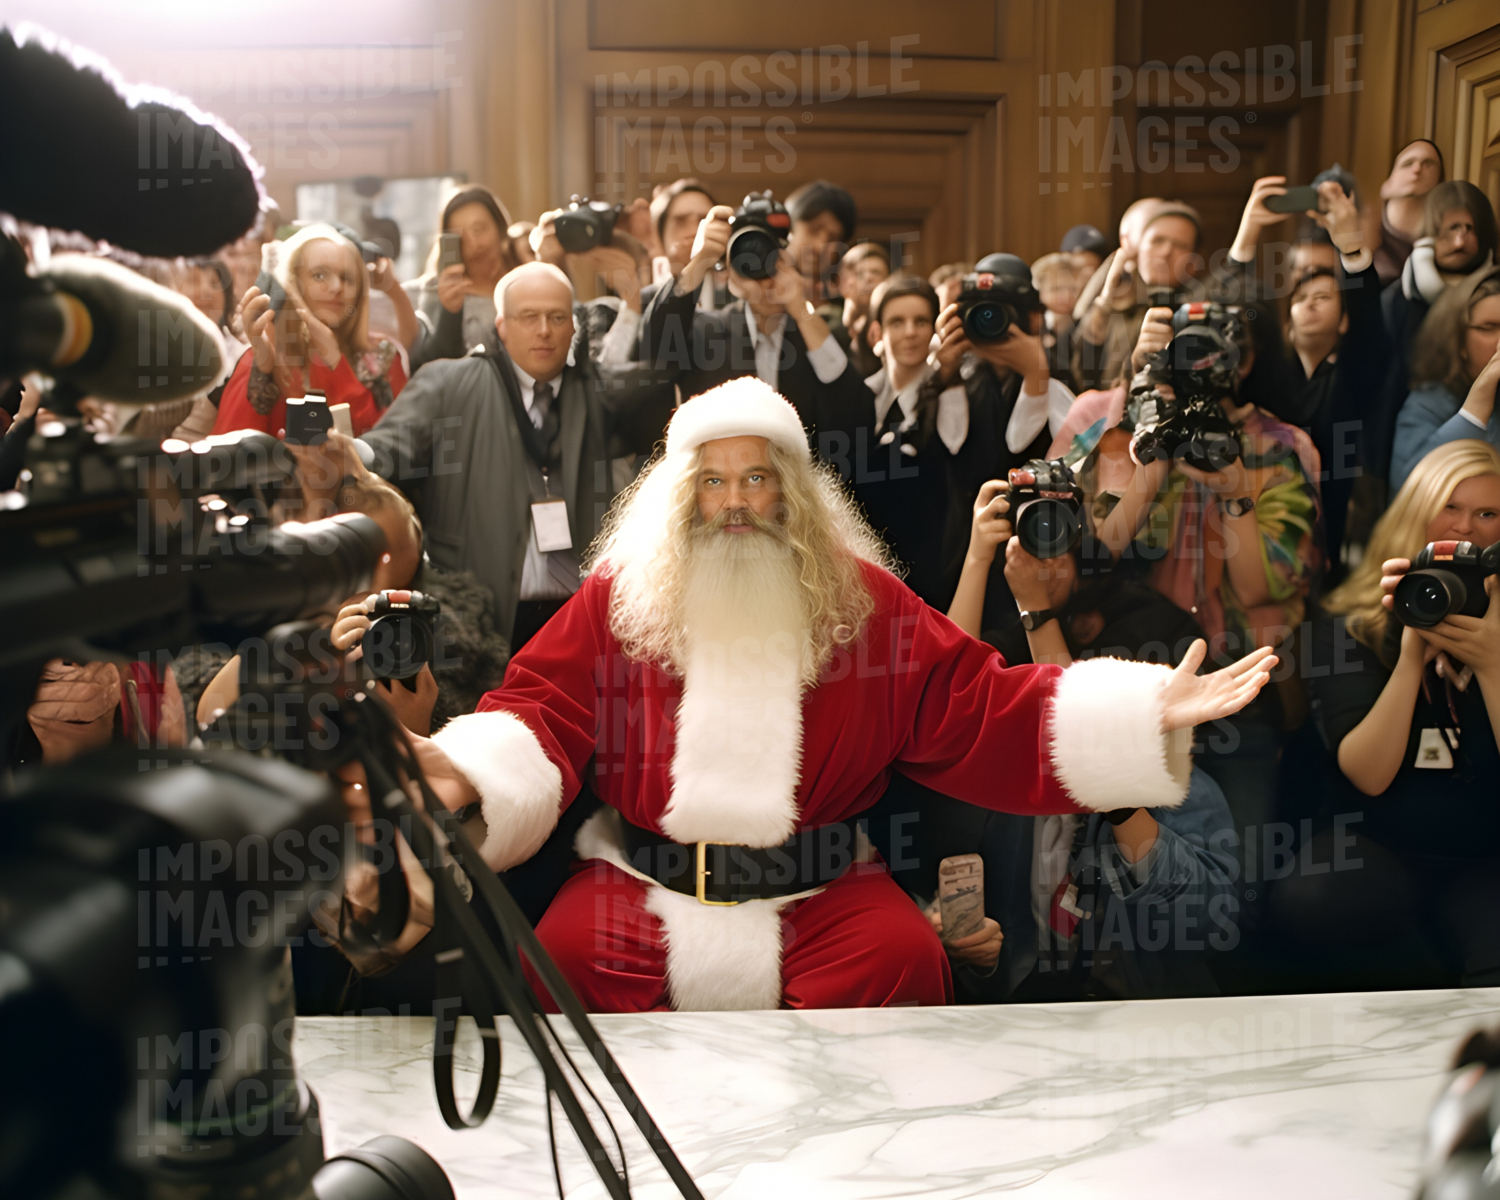 Santa on trial -  Santa Claus is on trial for breaking the law, facing a jury of his peers to decide his fate. Will justice be served or will Santa be able to prove his innocence?